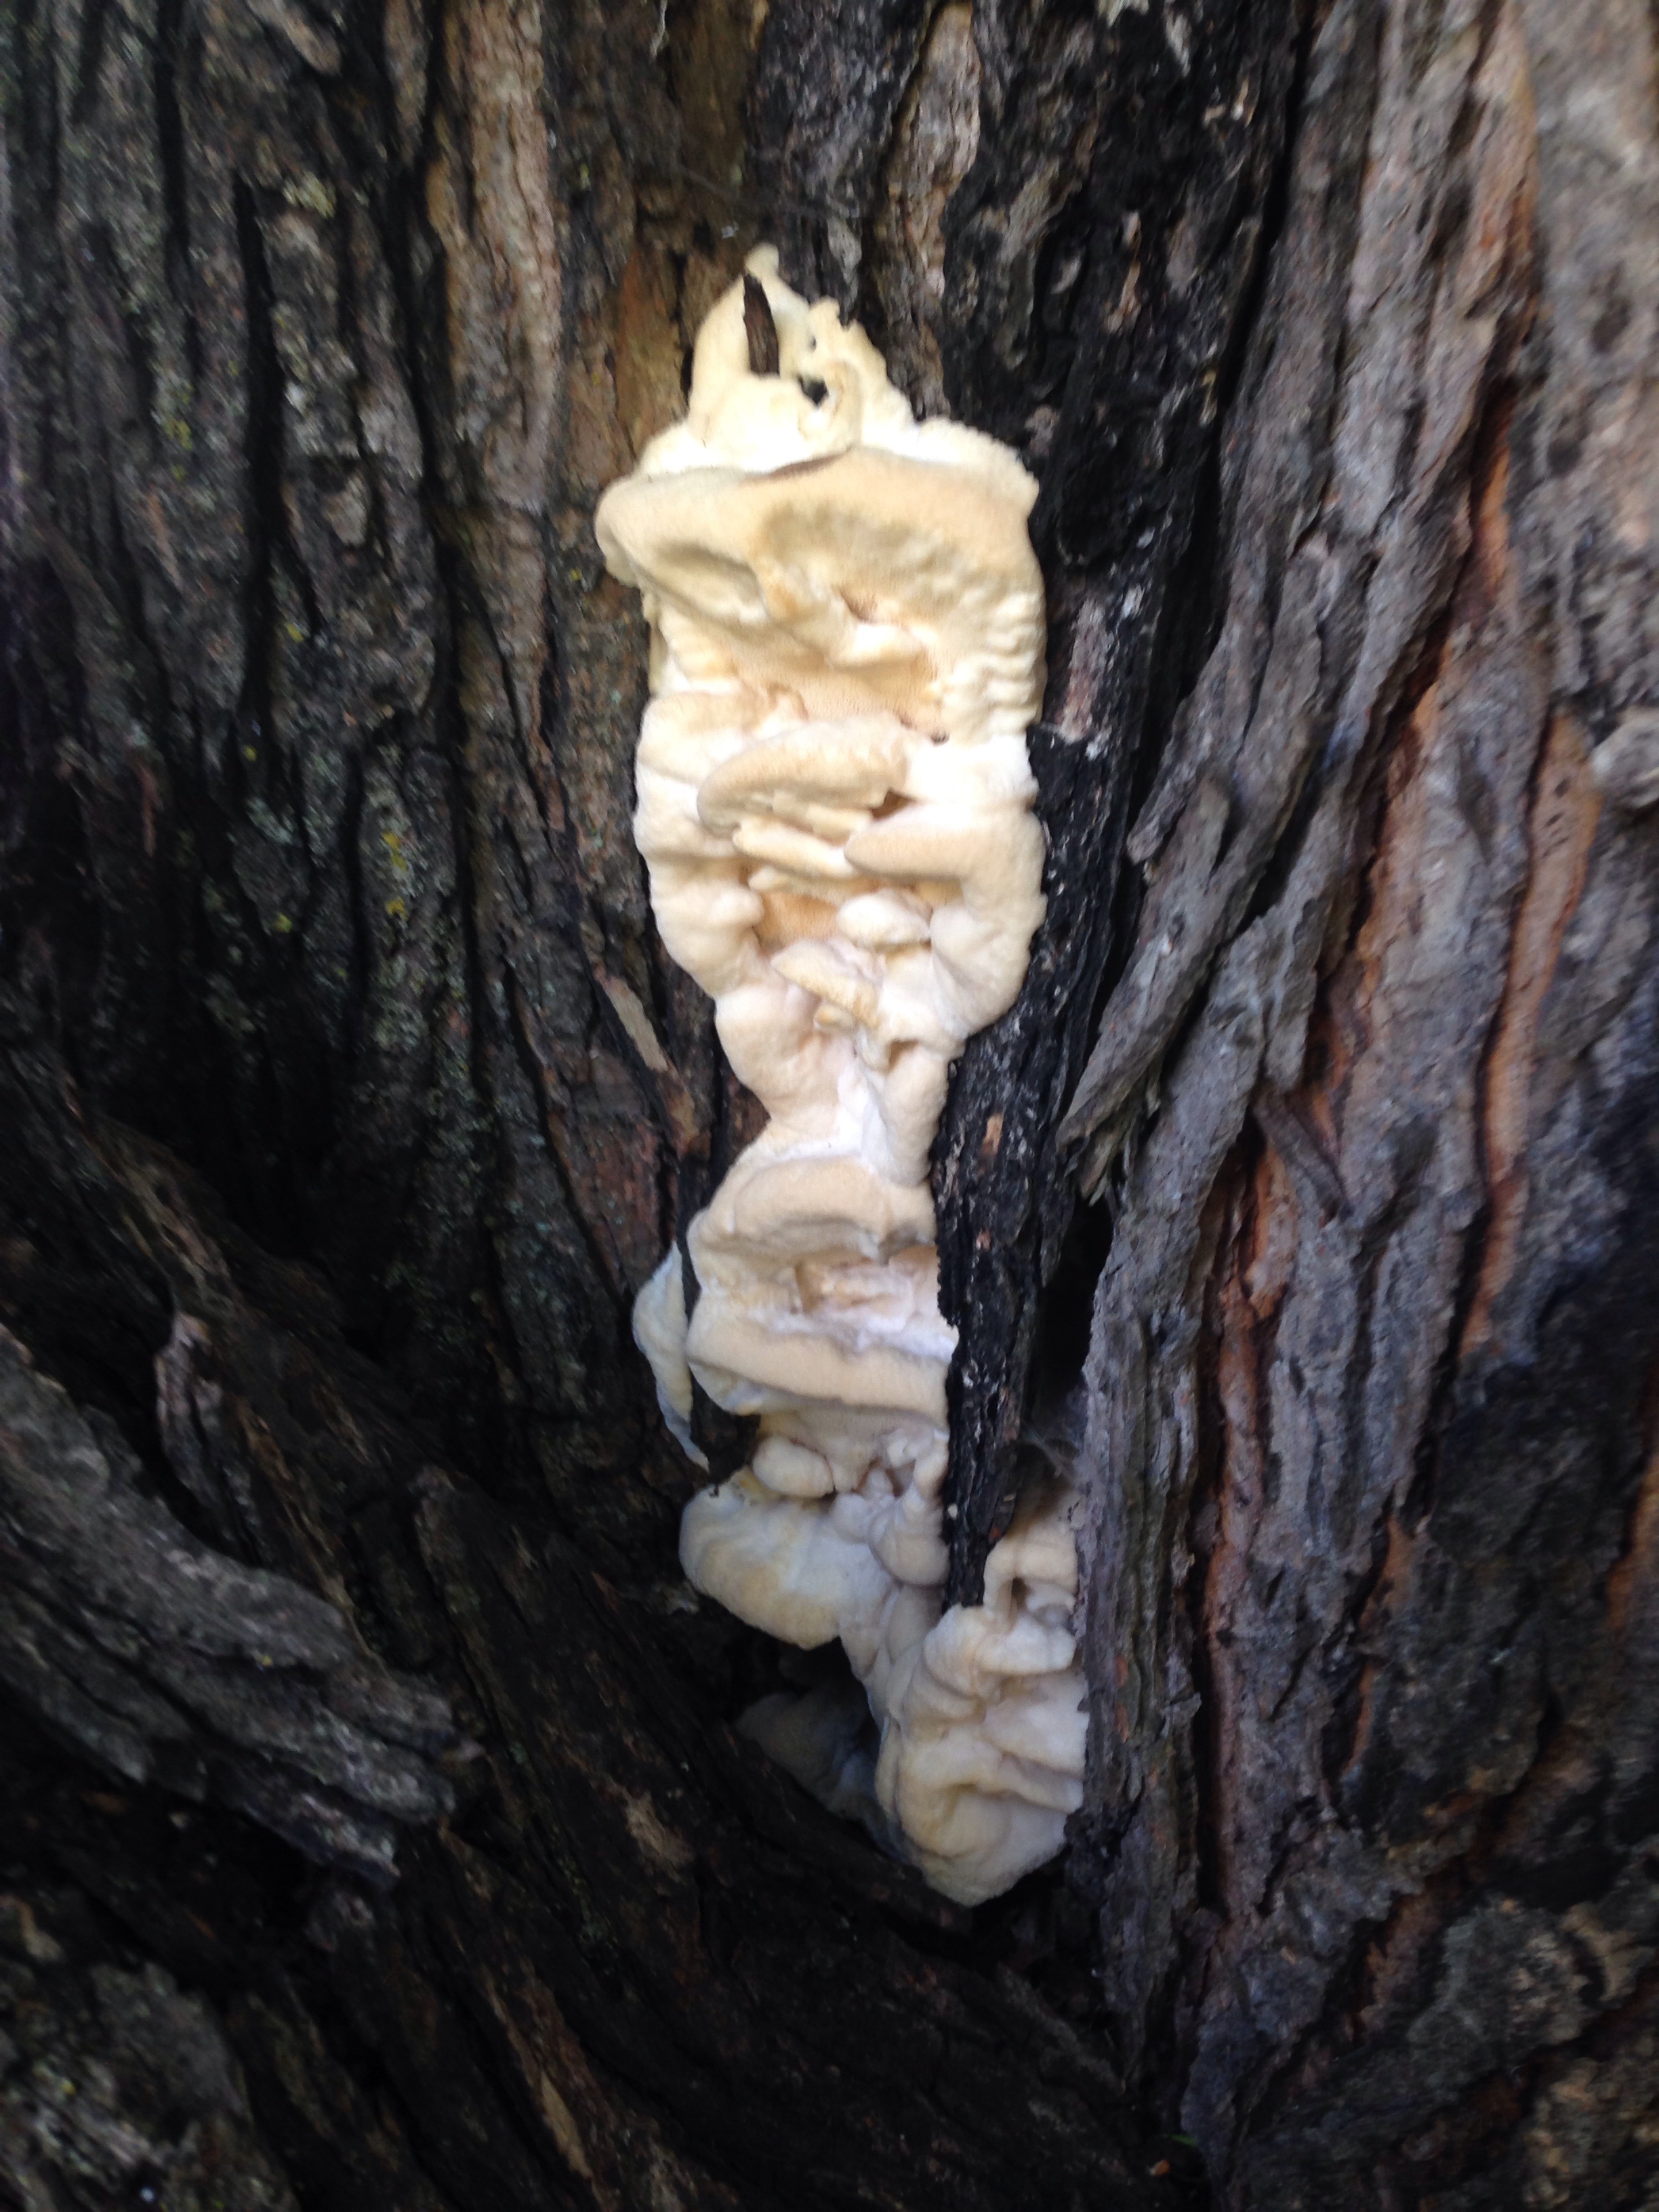 Fungus on Maple tree - Ask an Expert